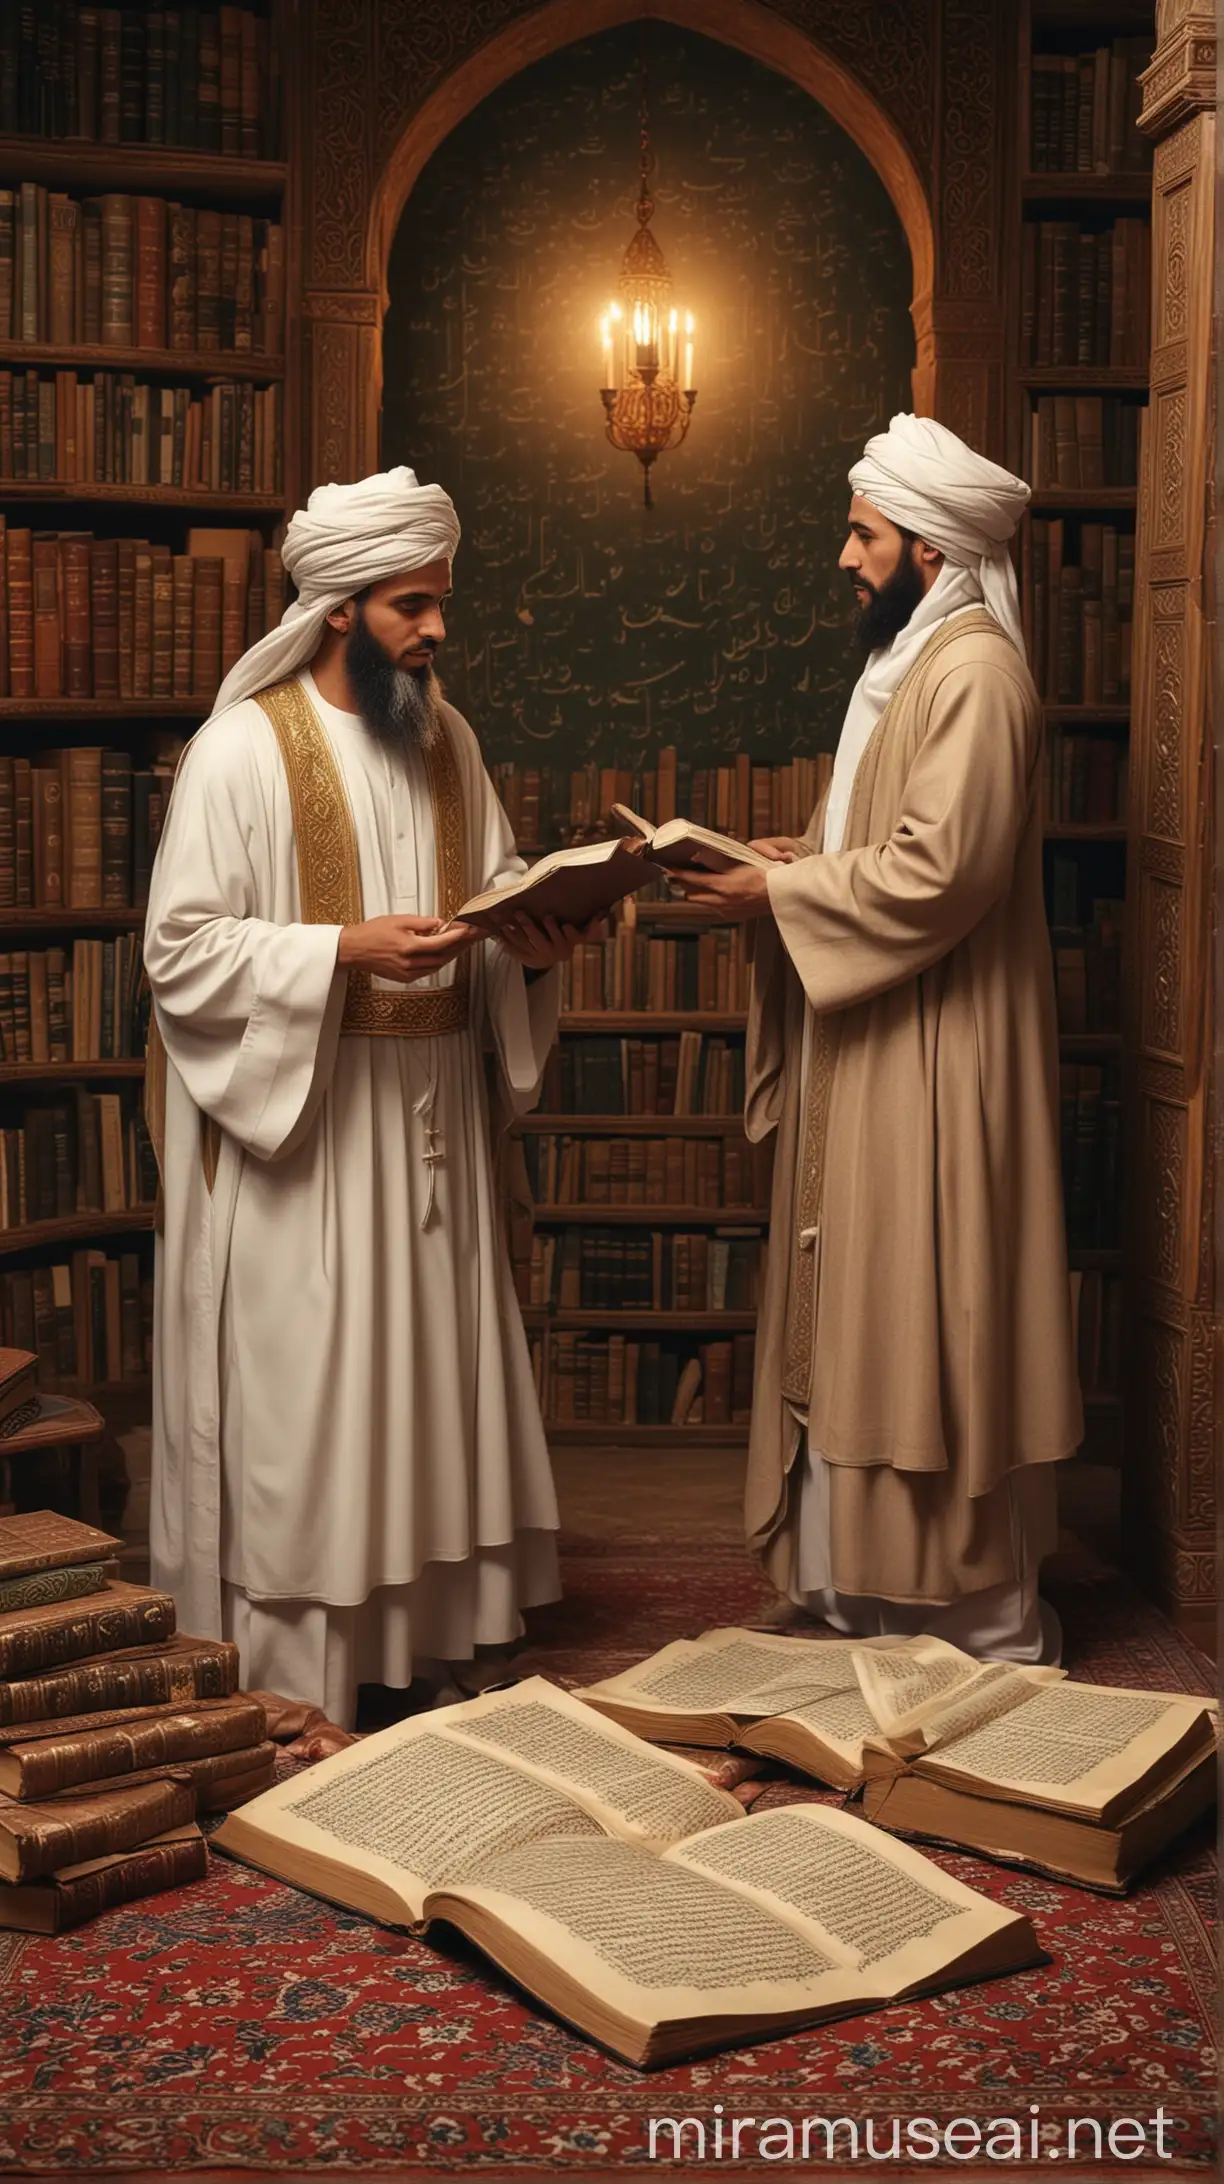 Prophet Muhammad and Abu Bakr in discussion: Depict a scene of Prophet Muhammad and Abu Bakr engaged in deep conversation, symbolizing their close companionship and the strengthening of their bond through the marriage.
Aisha's scholarly pursuits: Showcase Aisha surrounded by books and scrolls, with islamic era HD and 4K